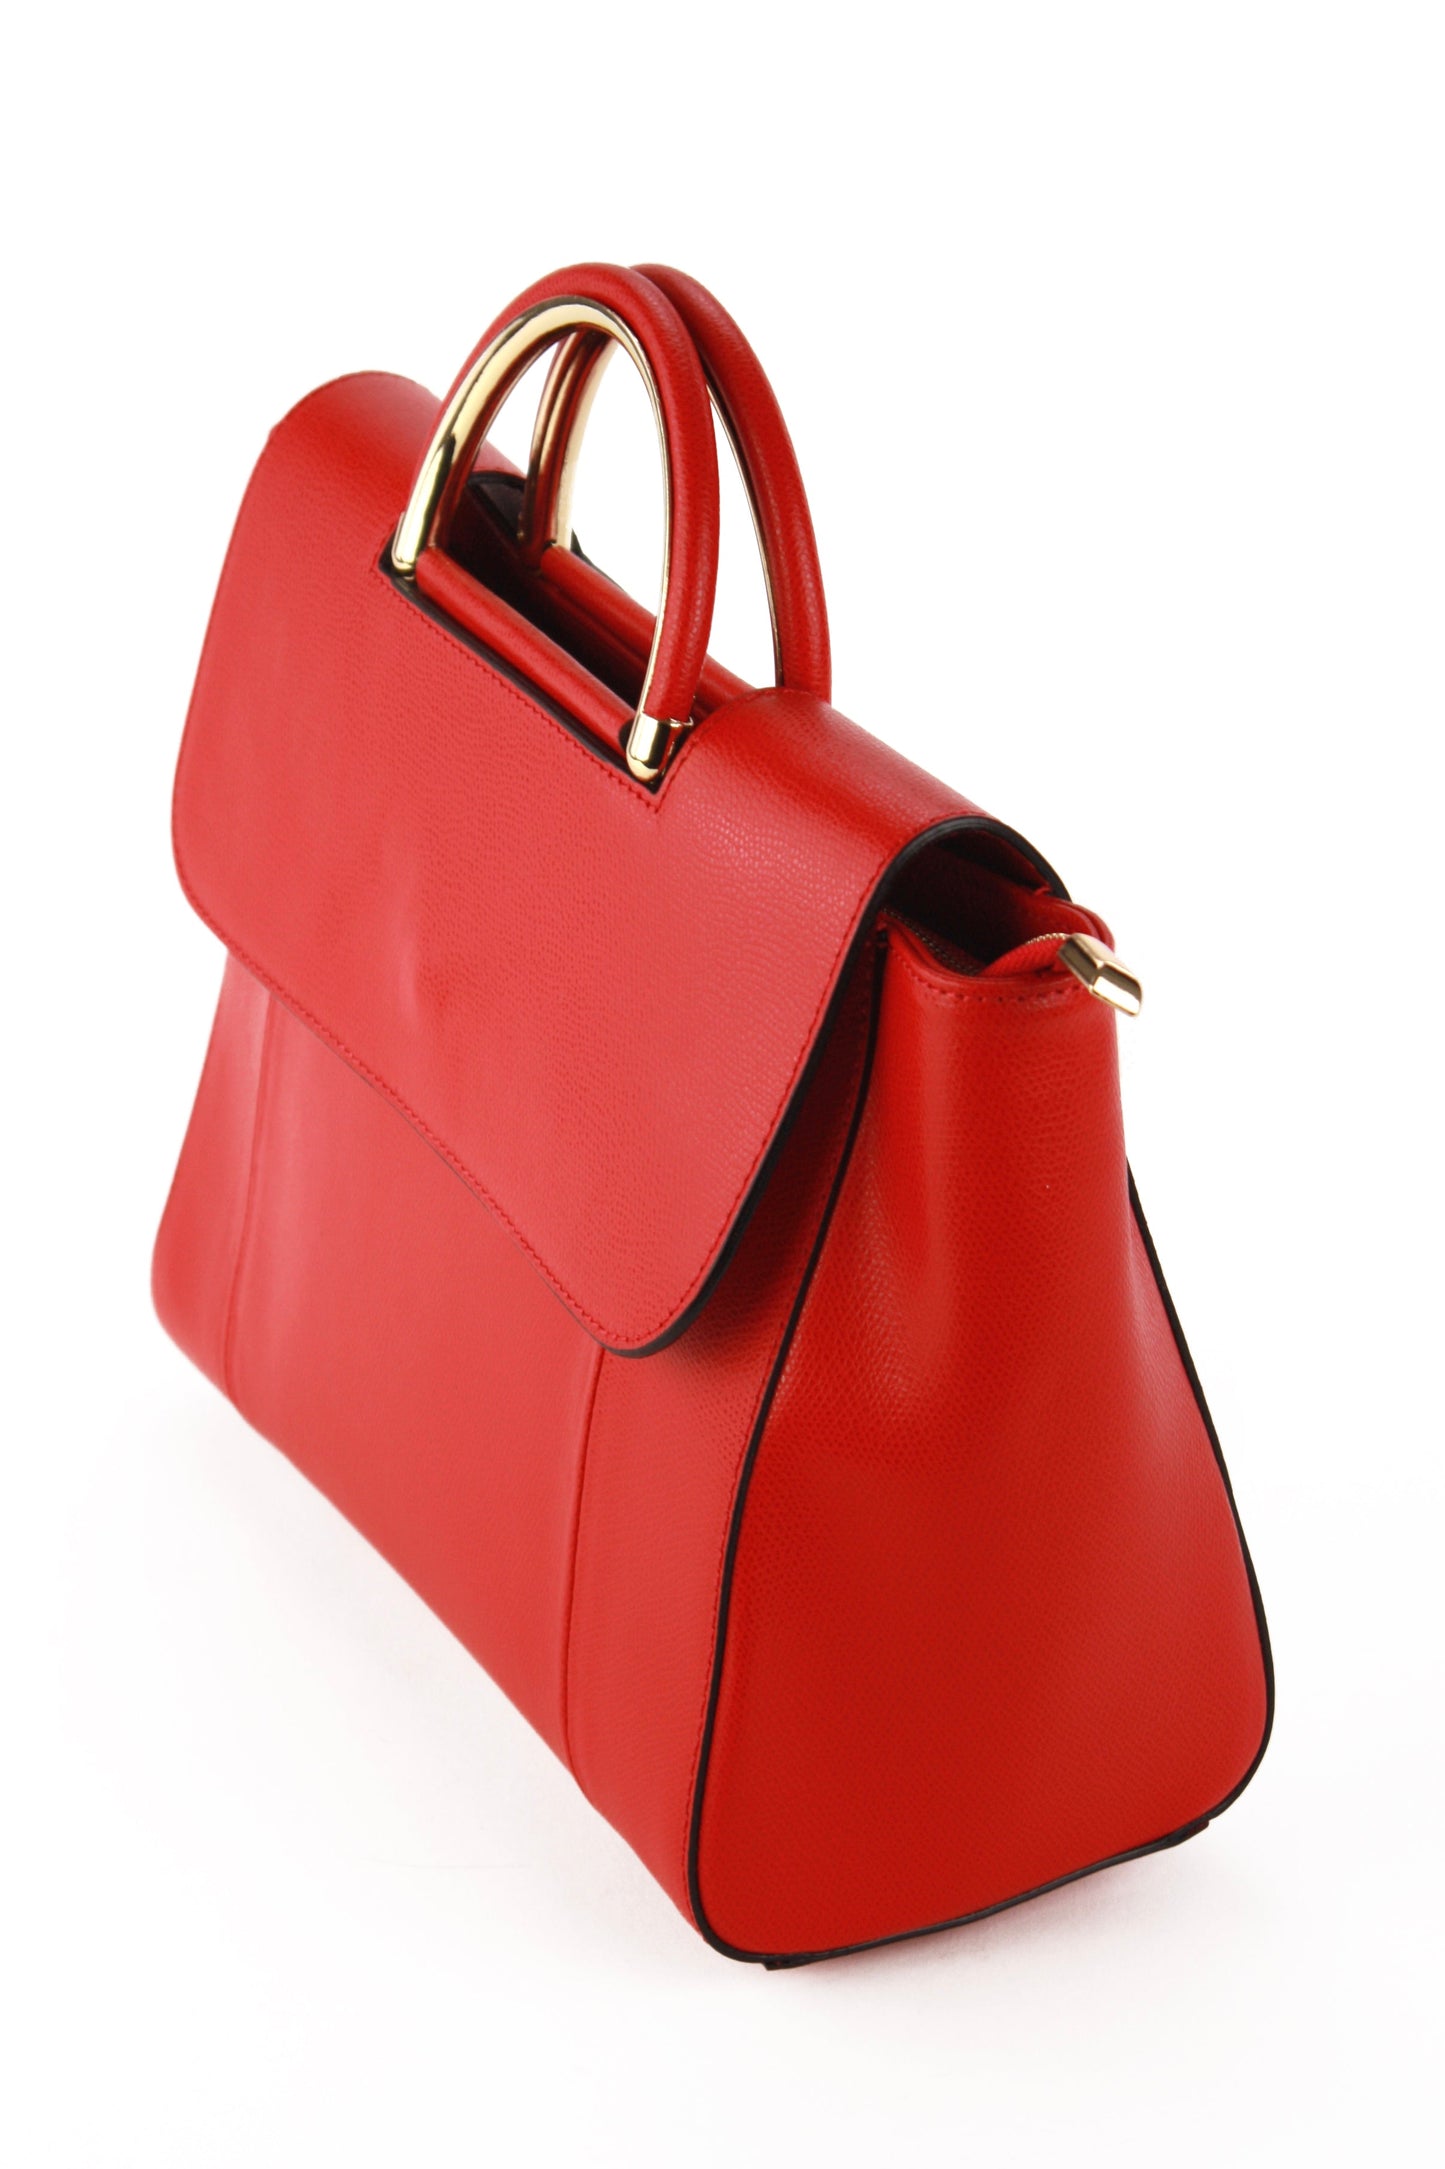 Melissa hand bag in red